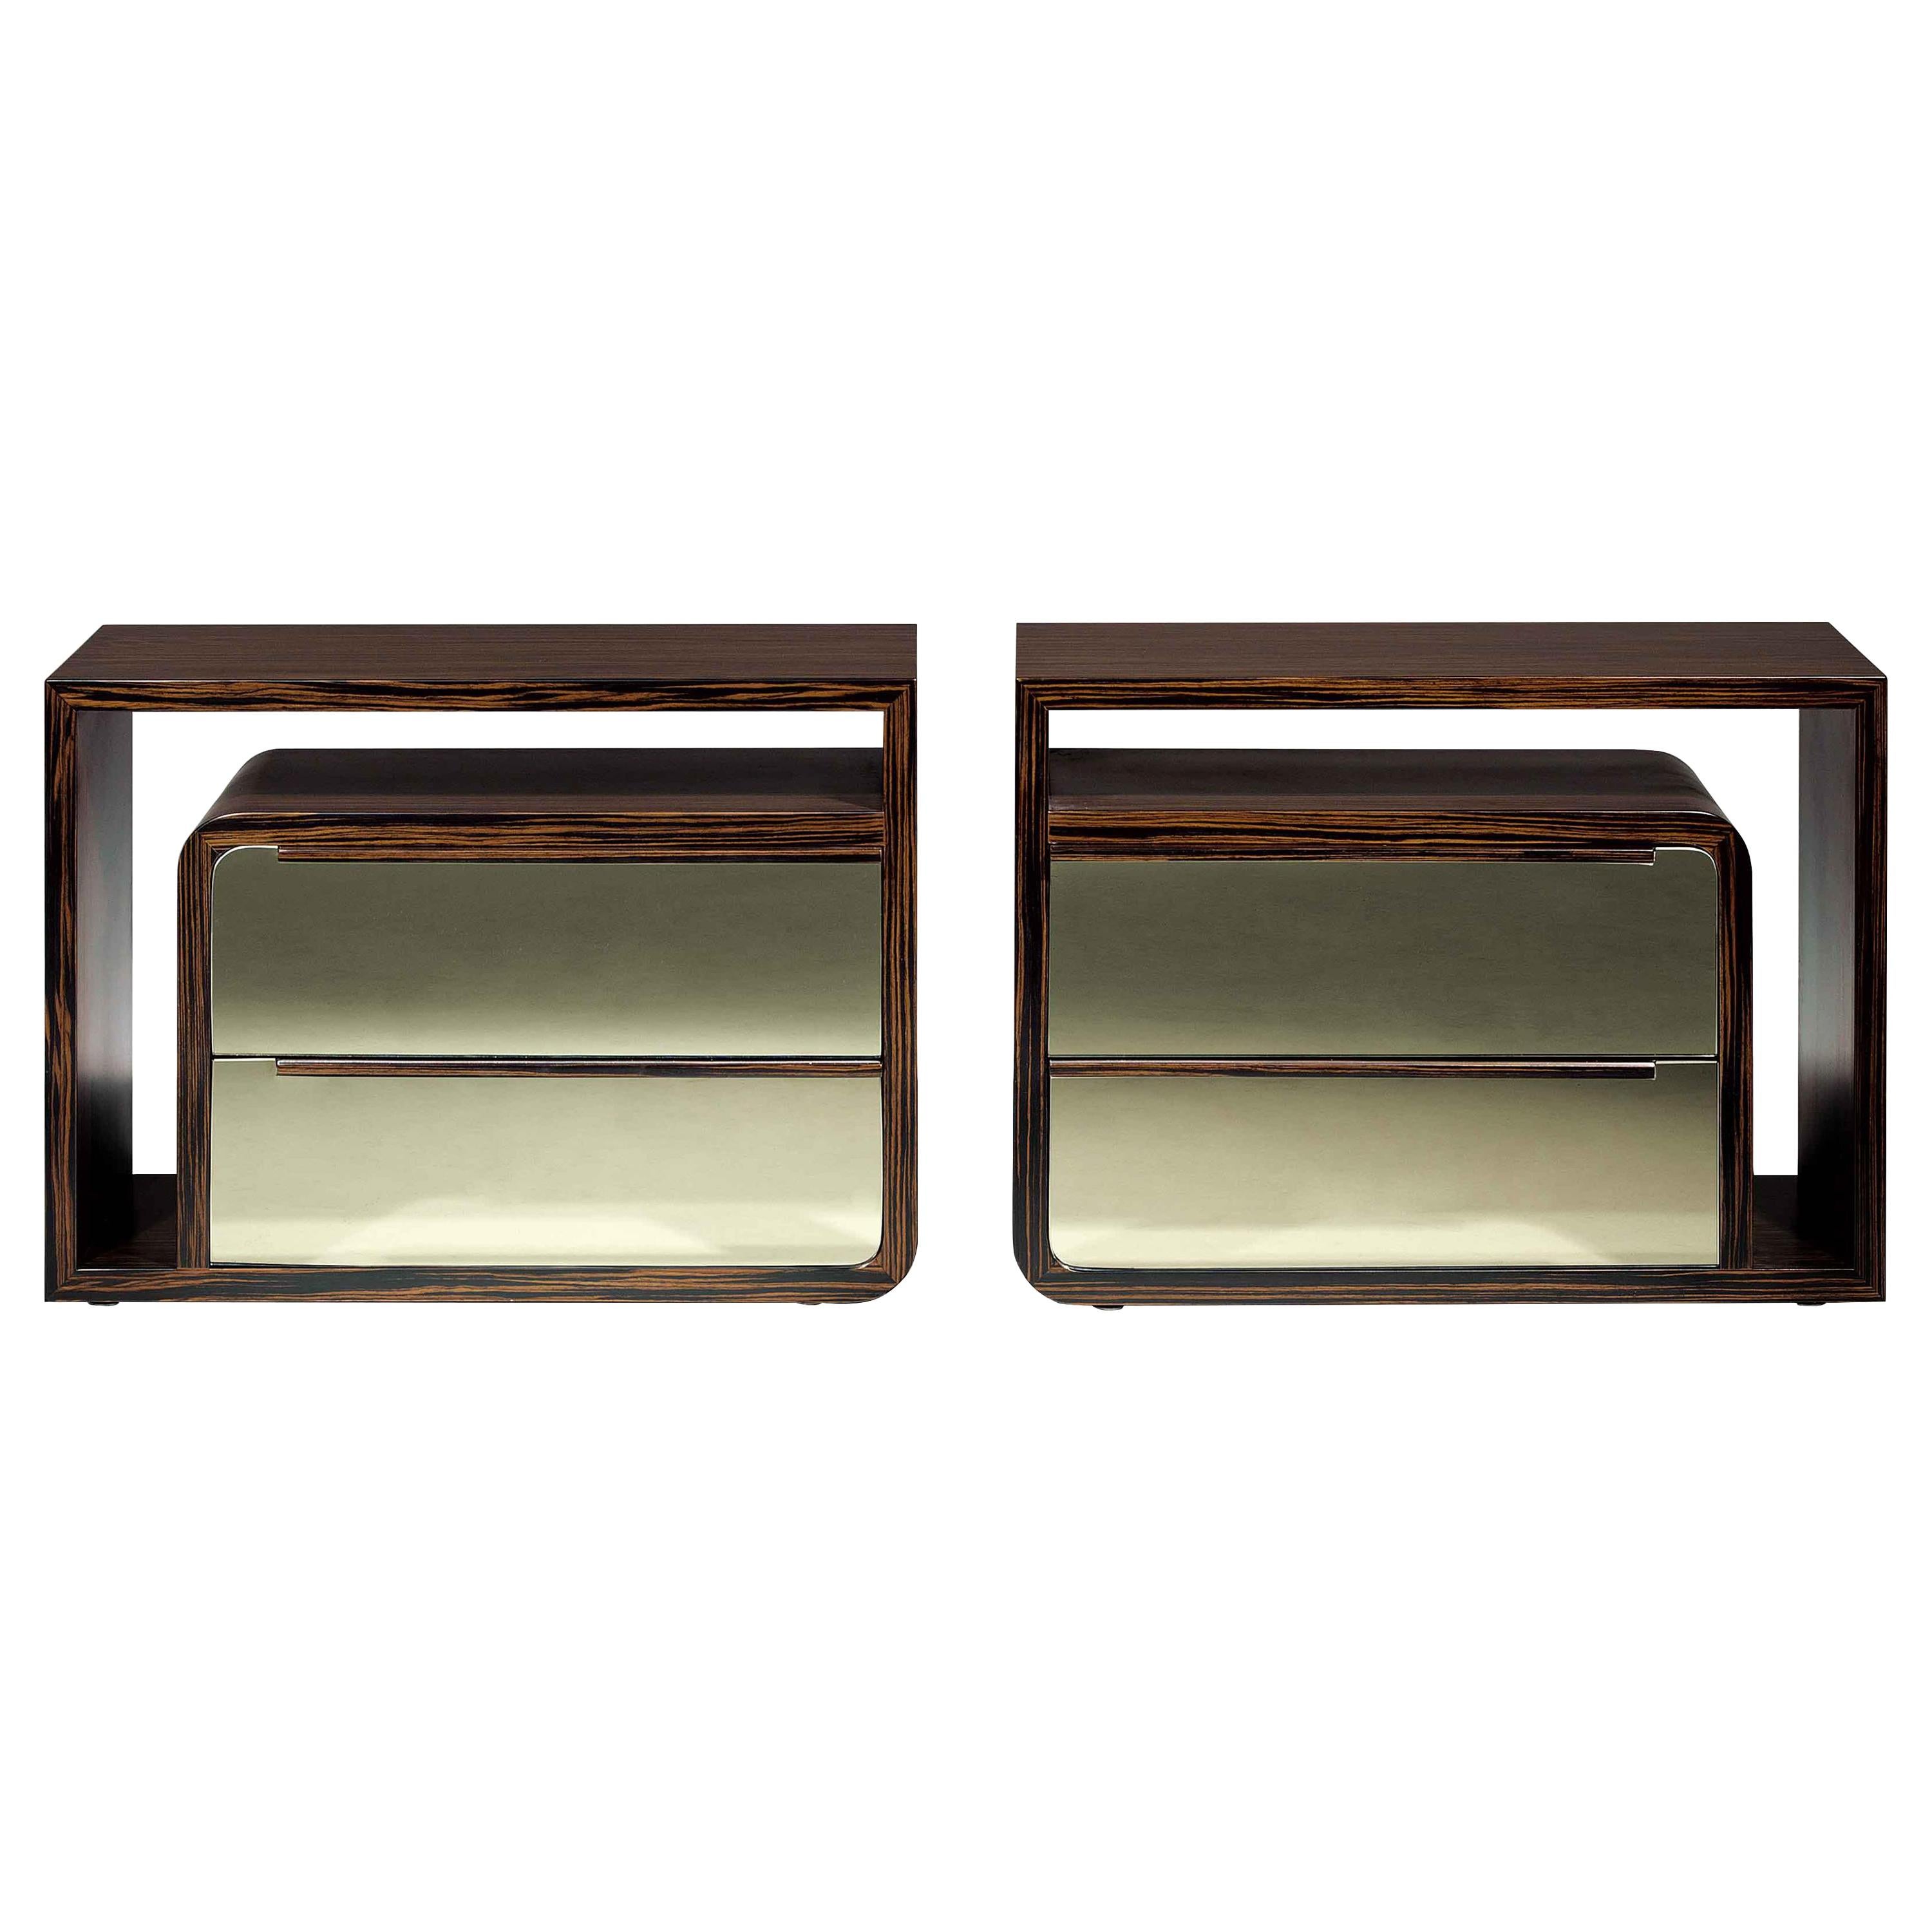 Rose Customized Bedside Table with Two Bronze Mirrored Drawers by Luísa Peixoto For Sale